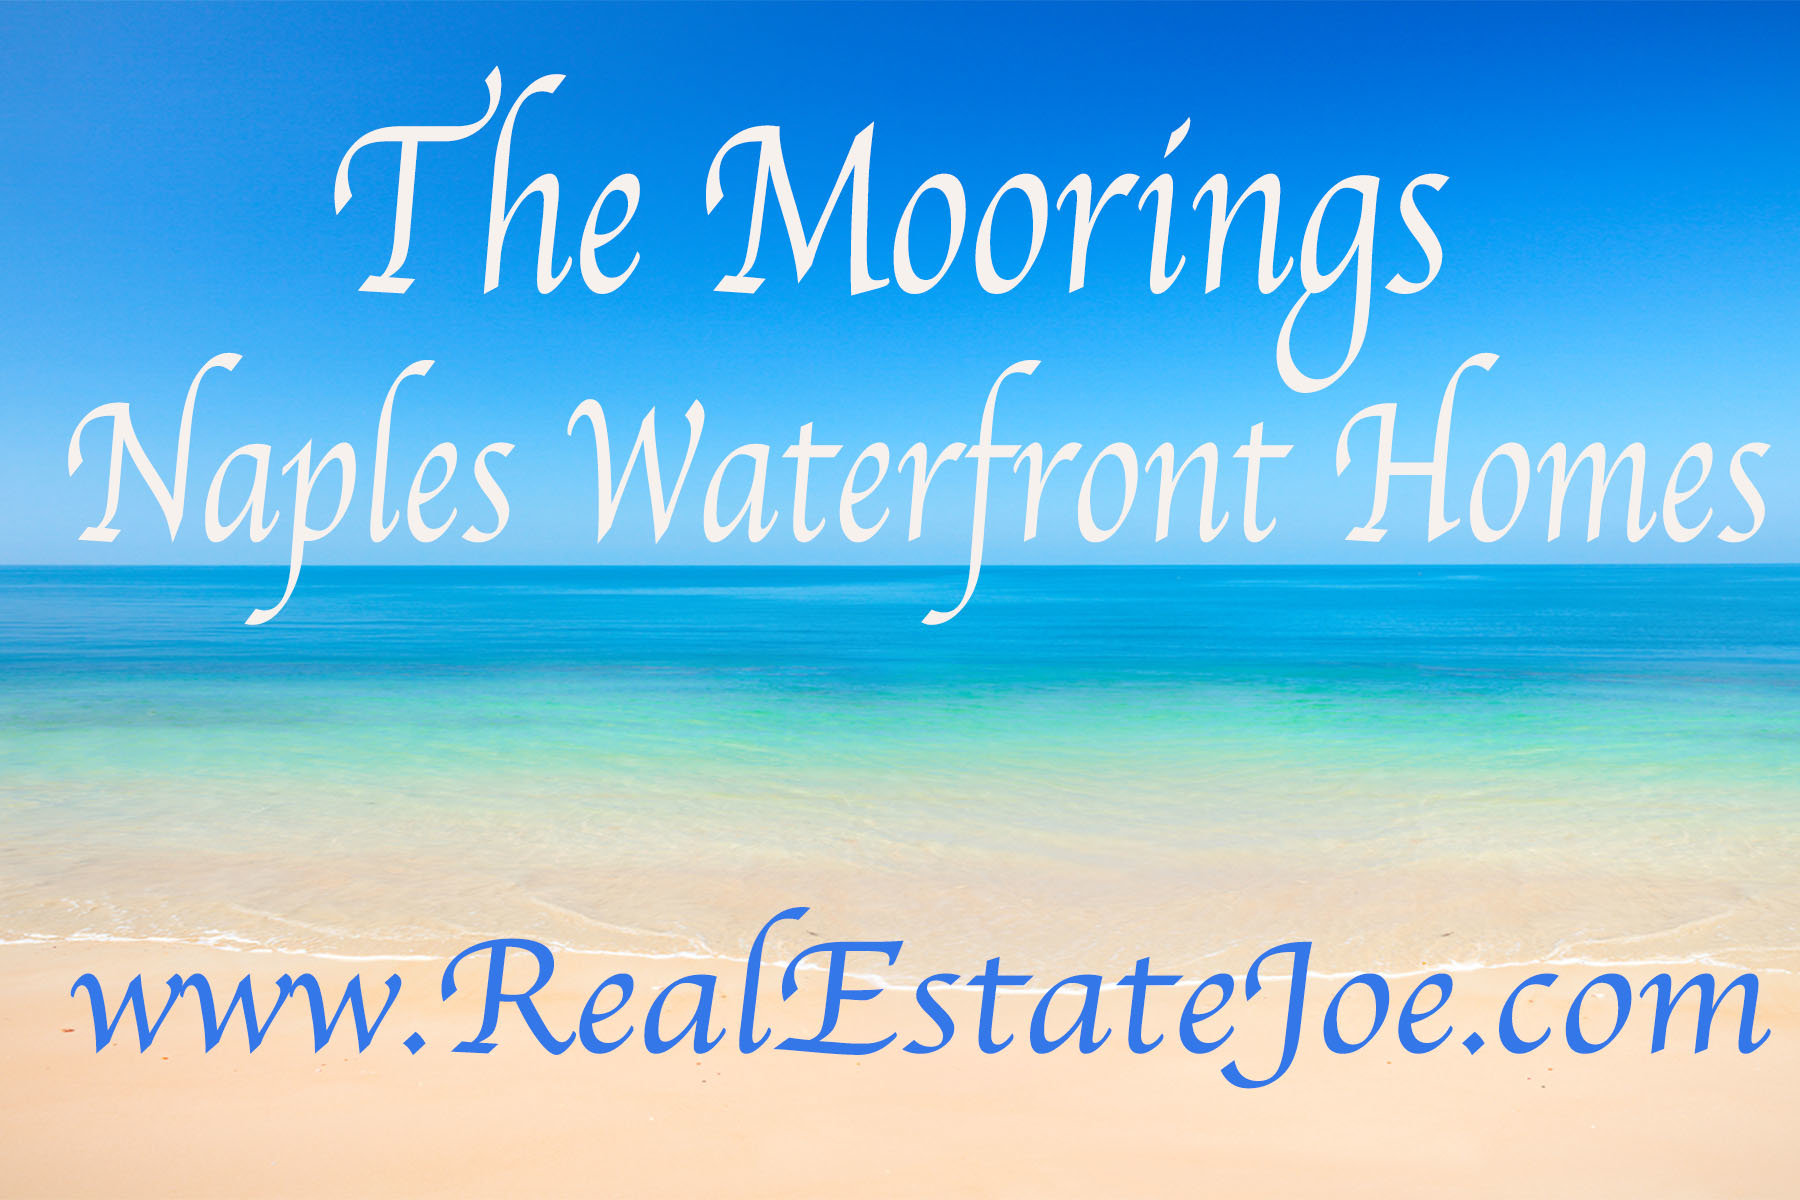 The Moorings Real Estate for sale Naples Florida